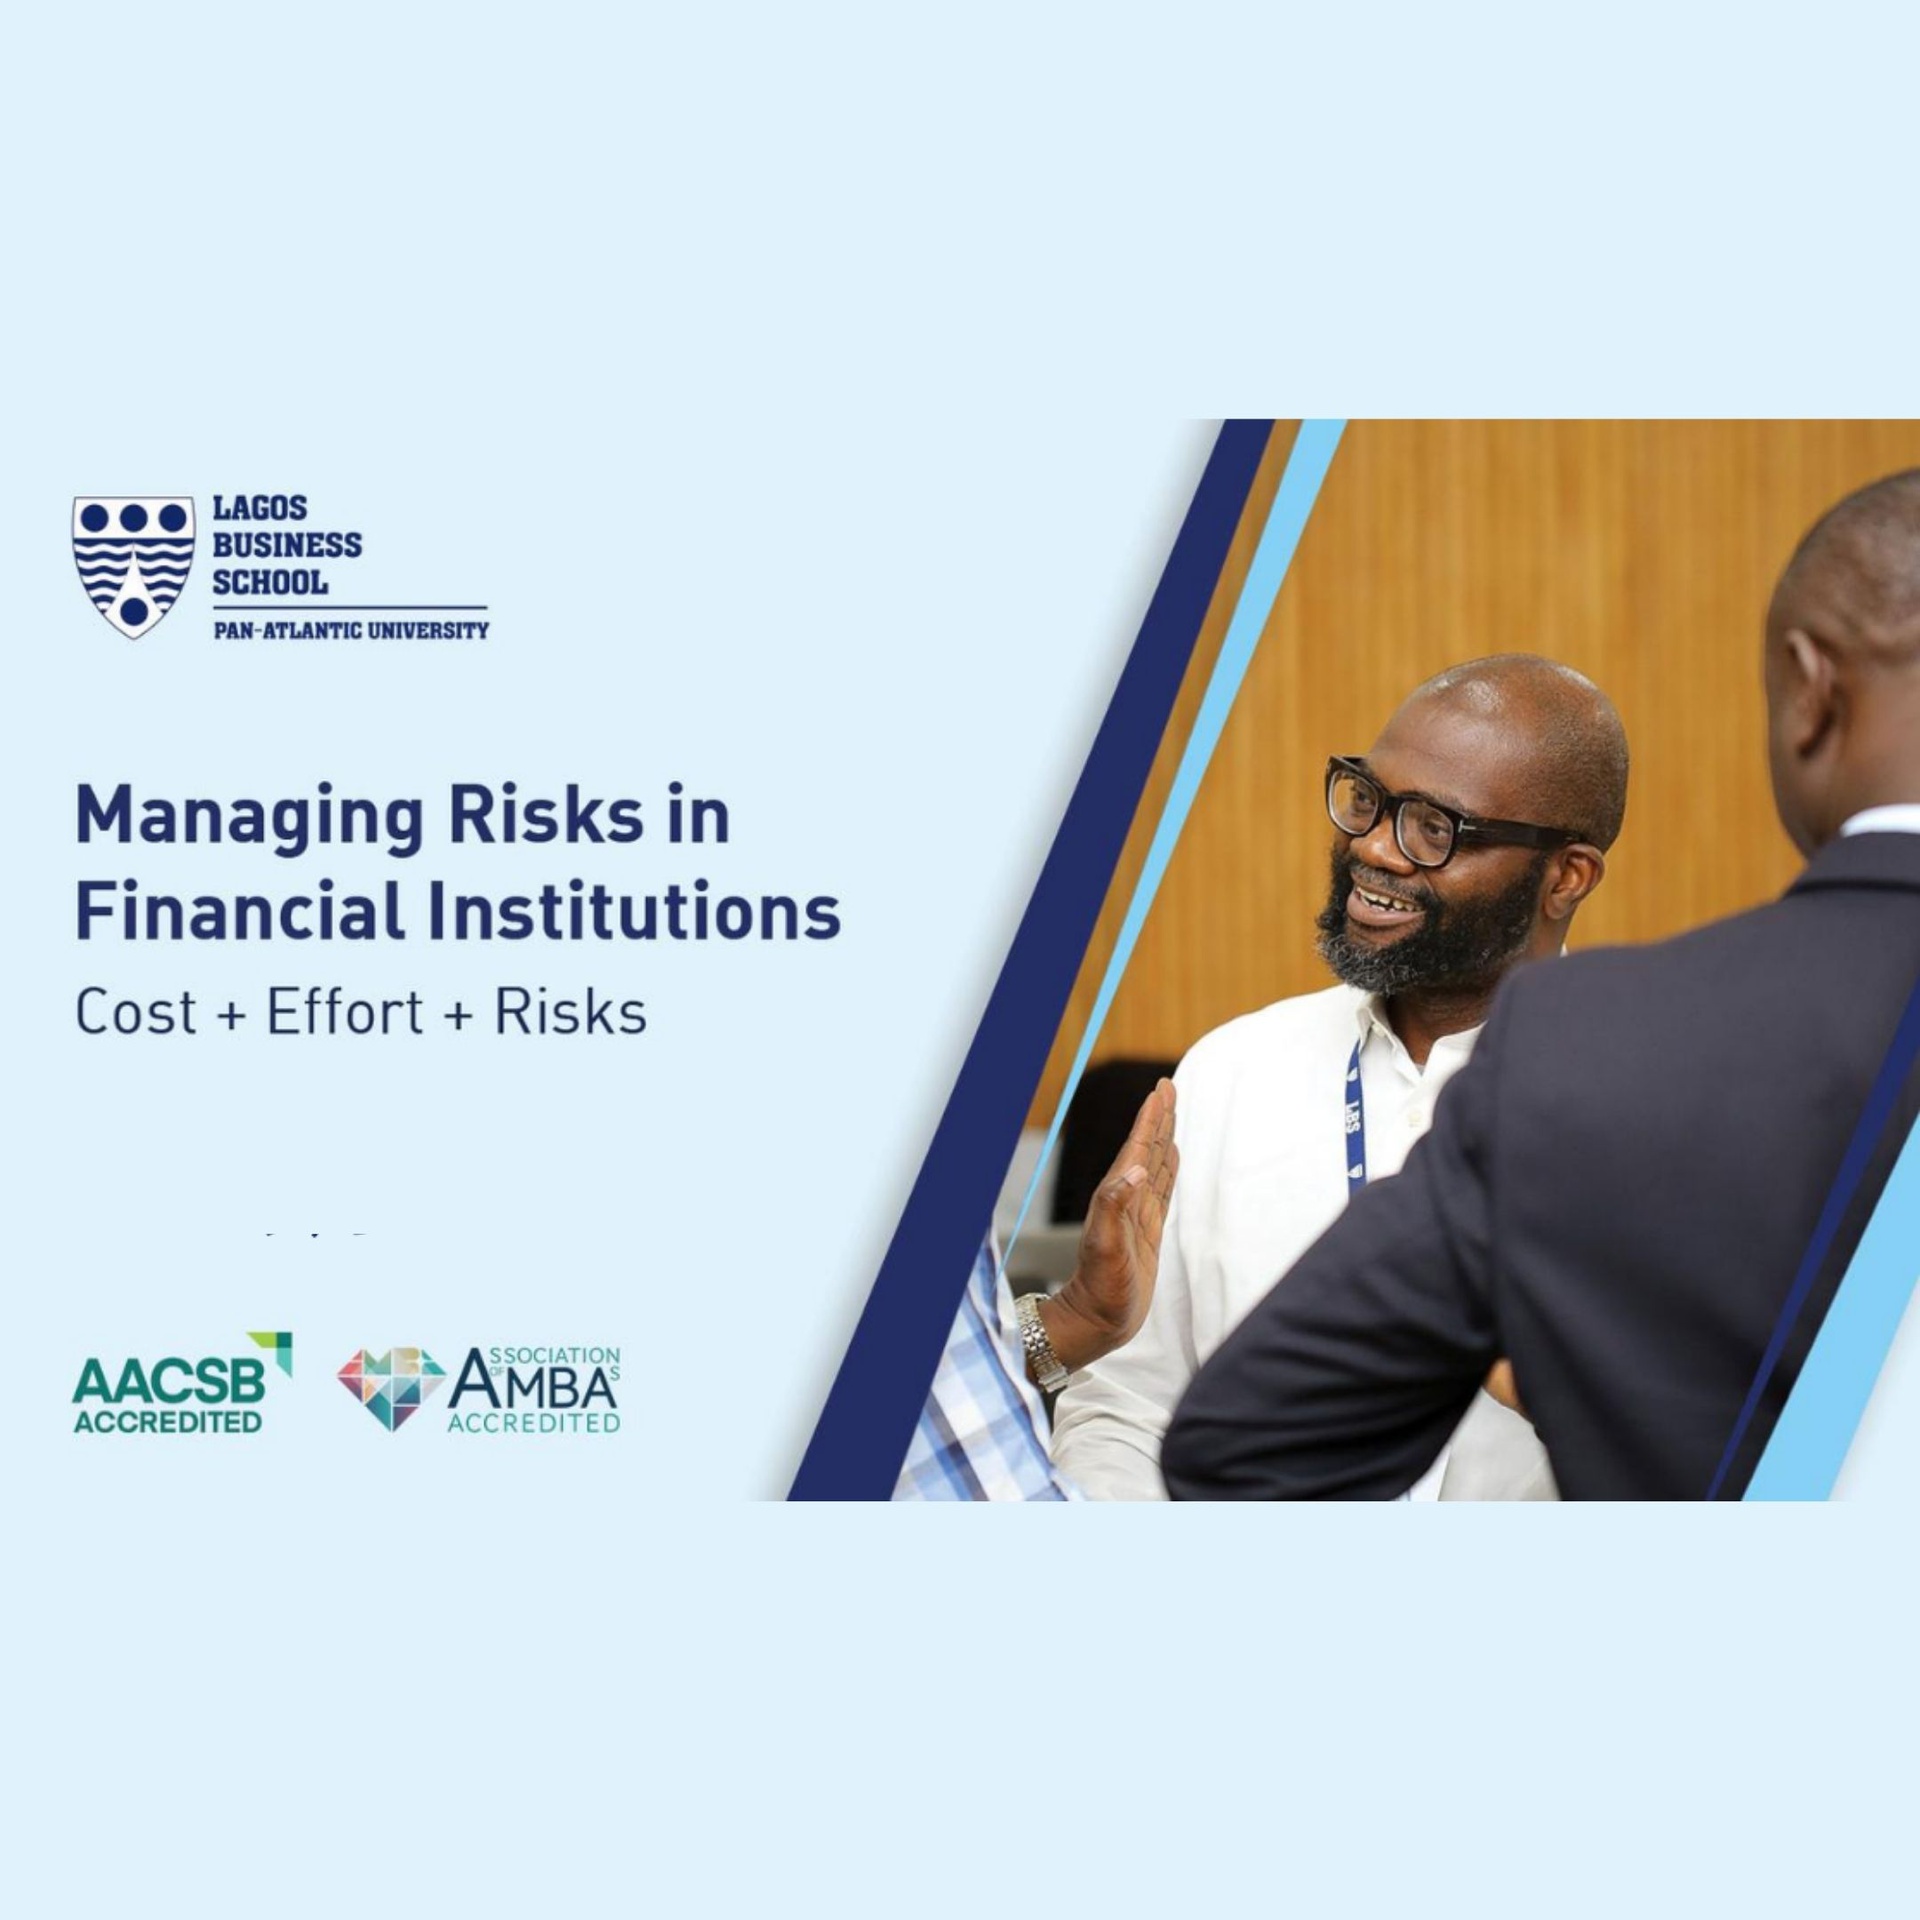 Managing Risks in Financial Institutions